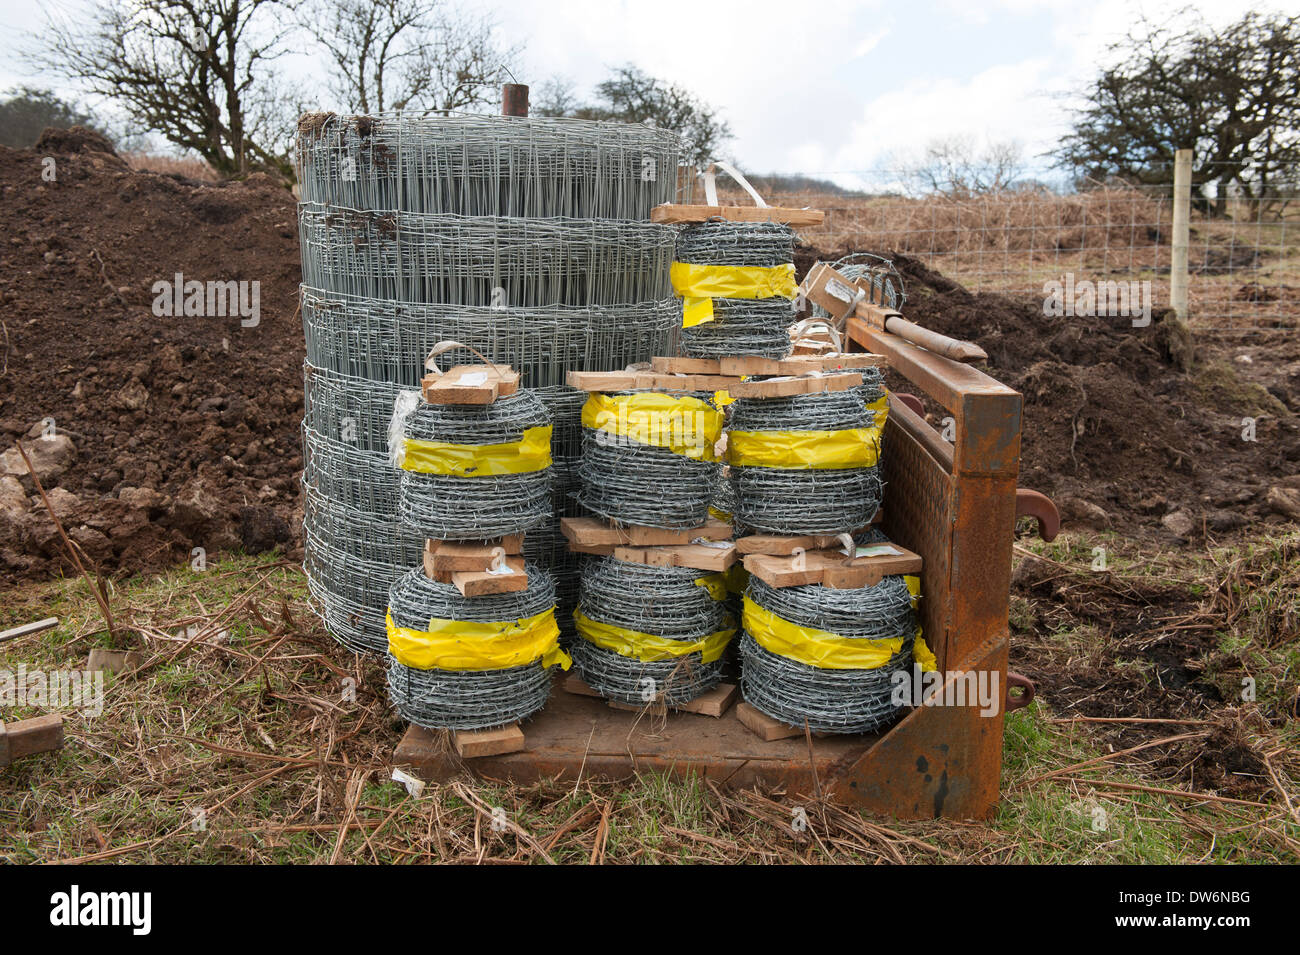 200 metre rolls of High tensile grade A barbed wire and wire fencing on a tractor cradle attachment Stock Photo